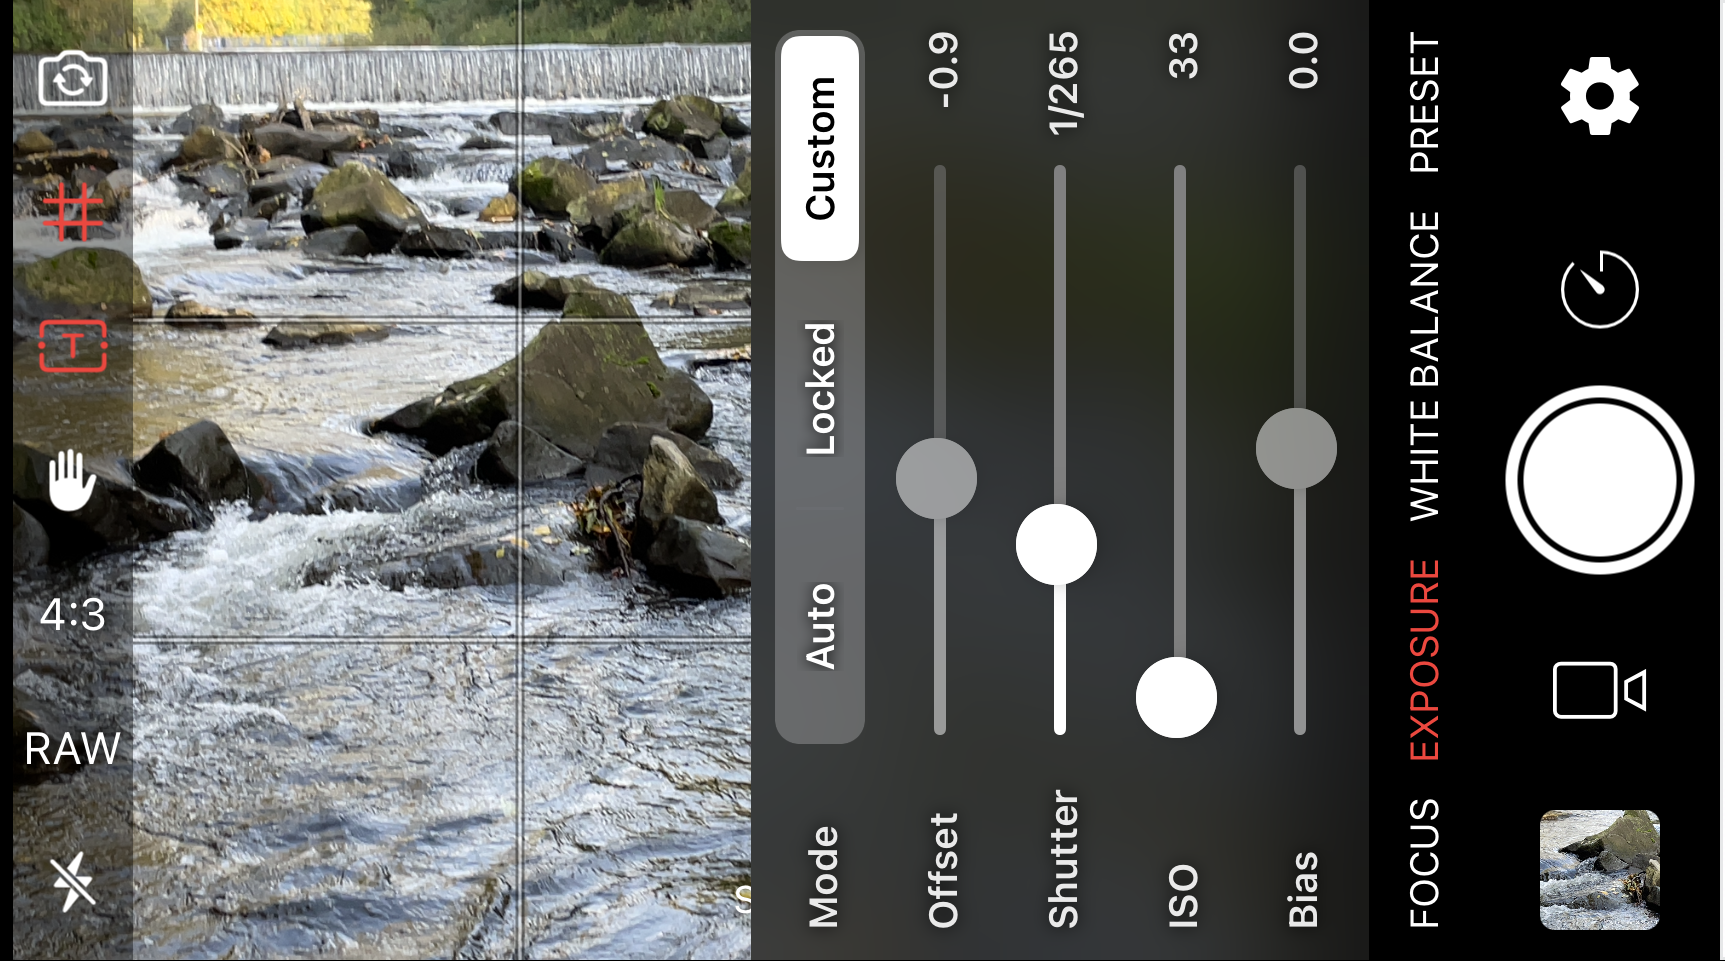 How to take pictures of a waterfall or flowing water with your mobile phone